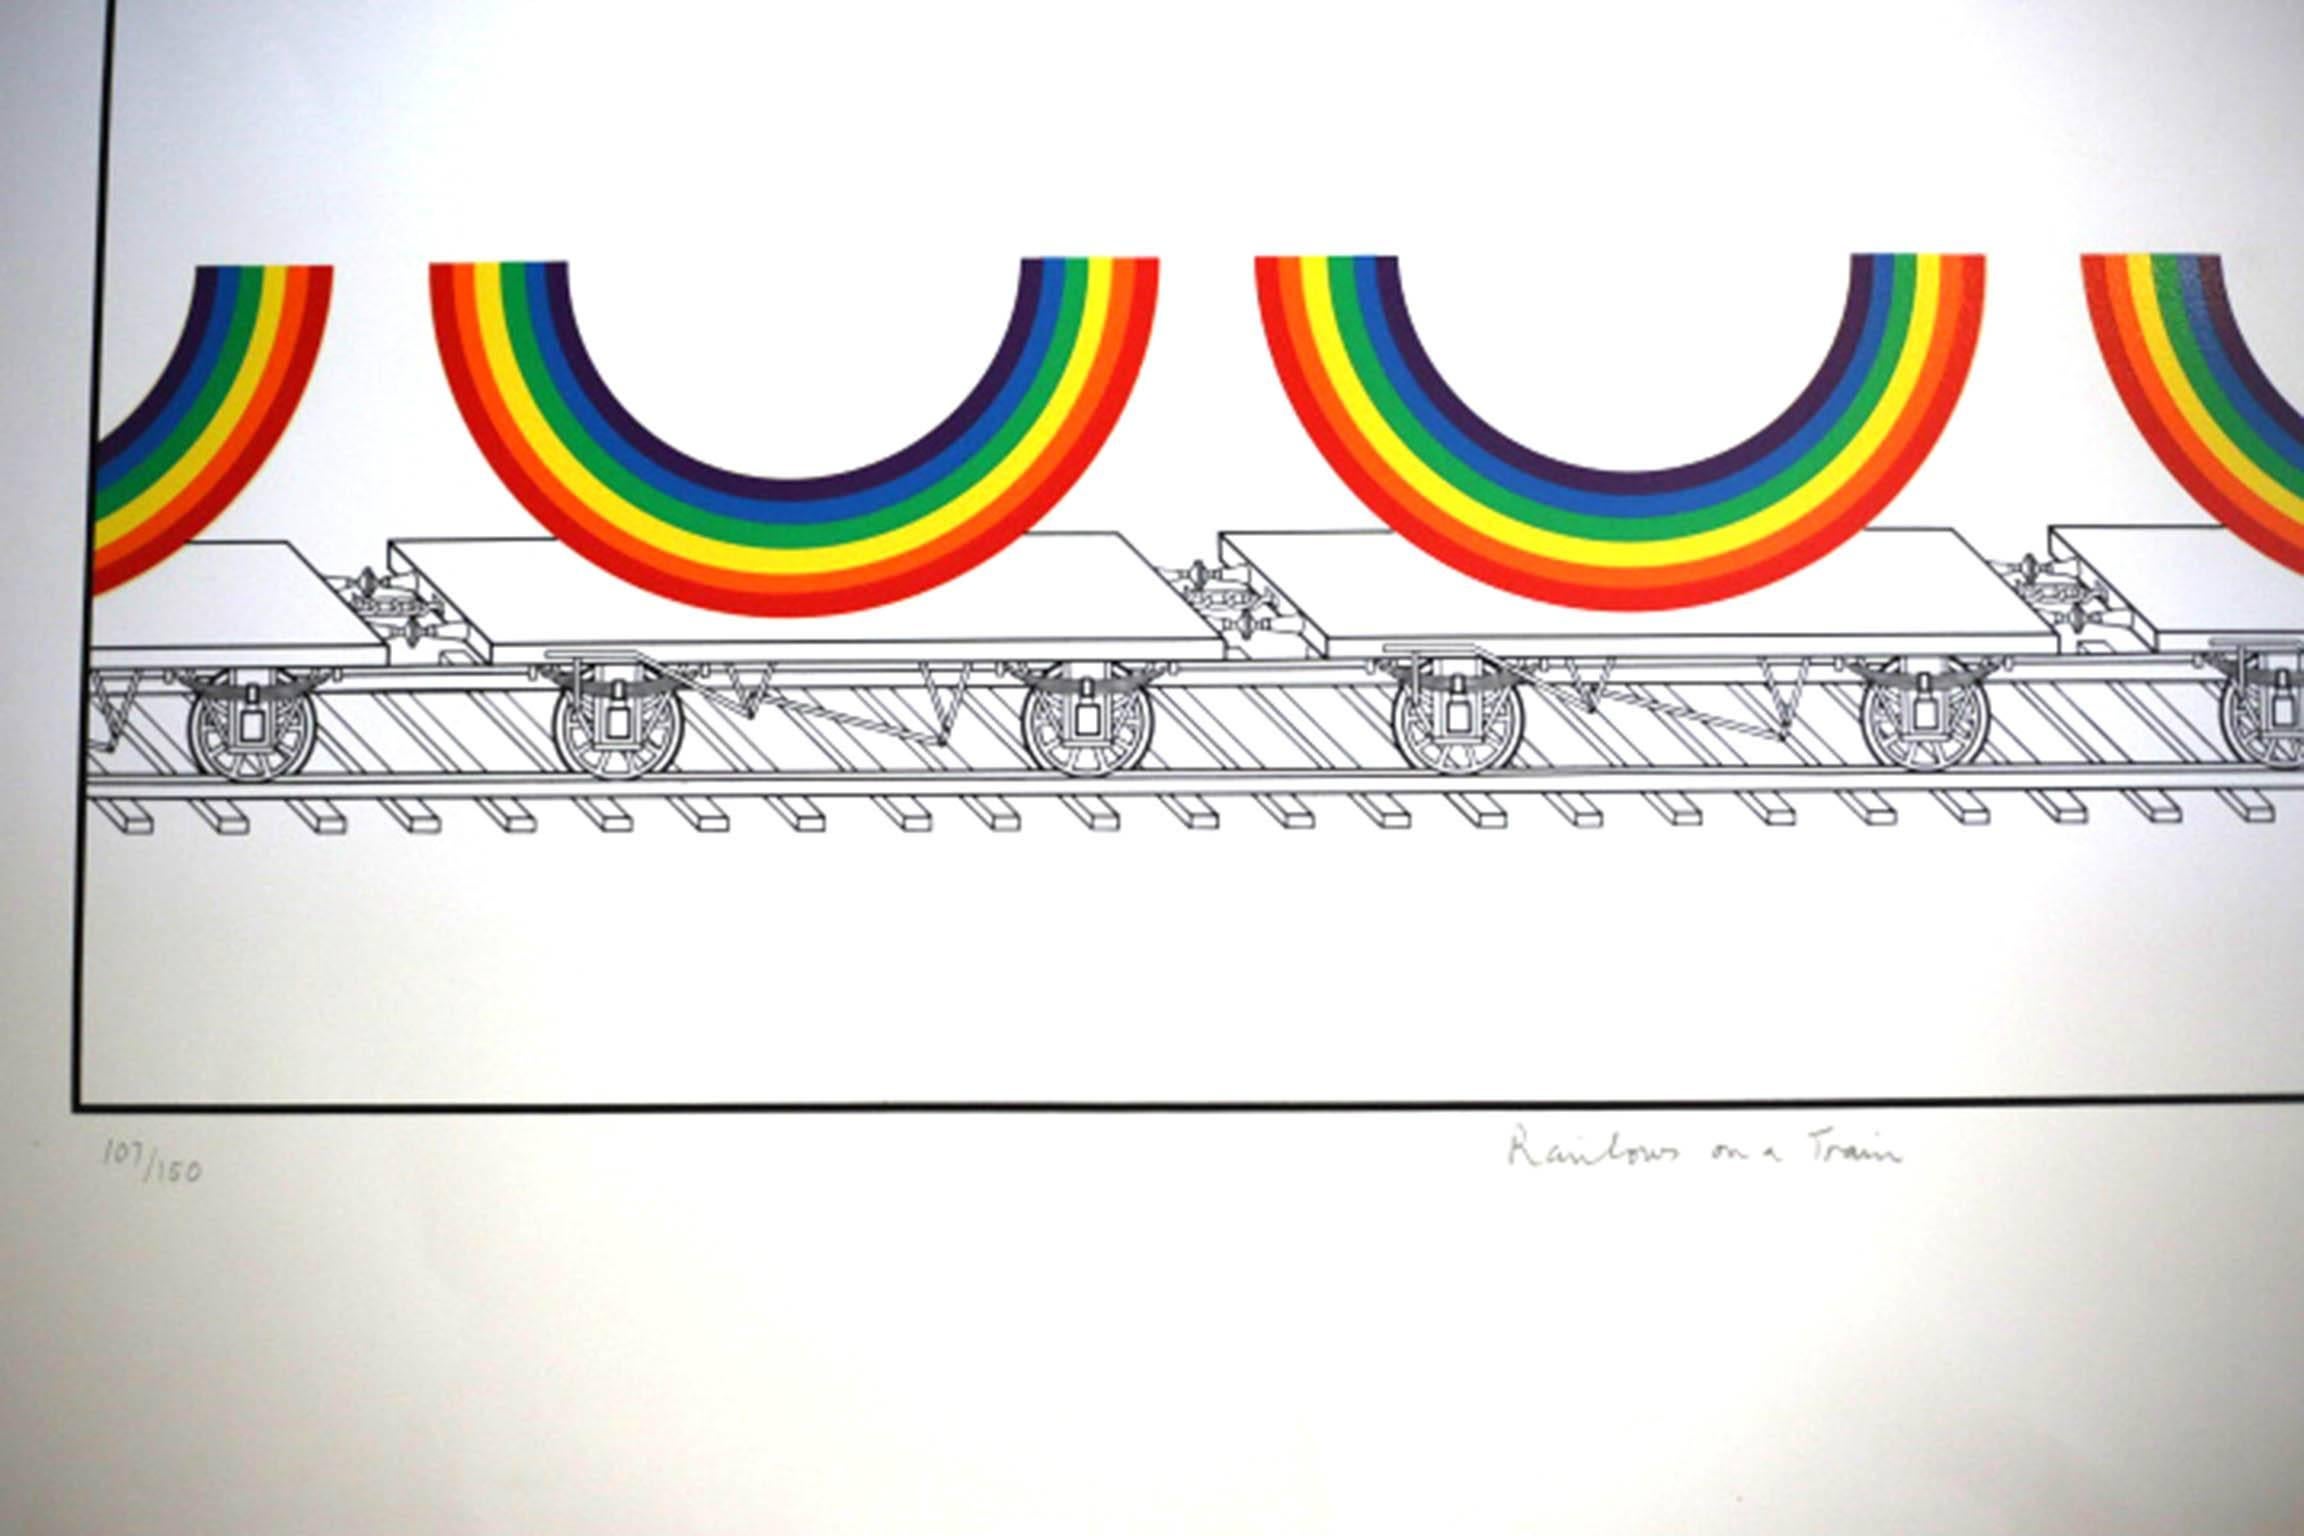 Artist: Patrick Hughes, British (1939)
Title: Rainbows on a Train
Year: 1980
Medium: Silkscreen, signed and numbered in pencil #107/150
Image: 20